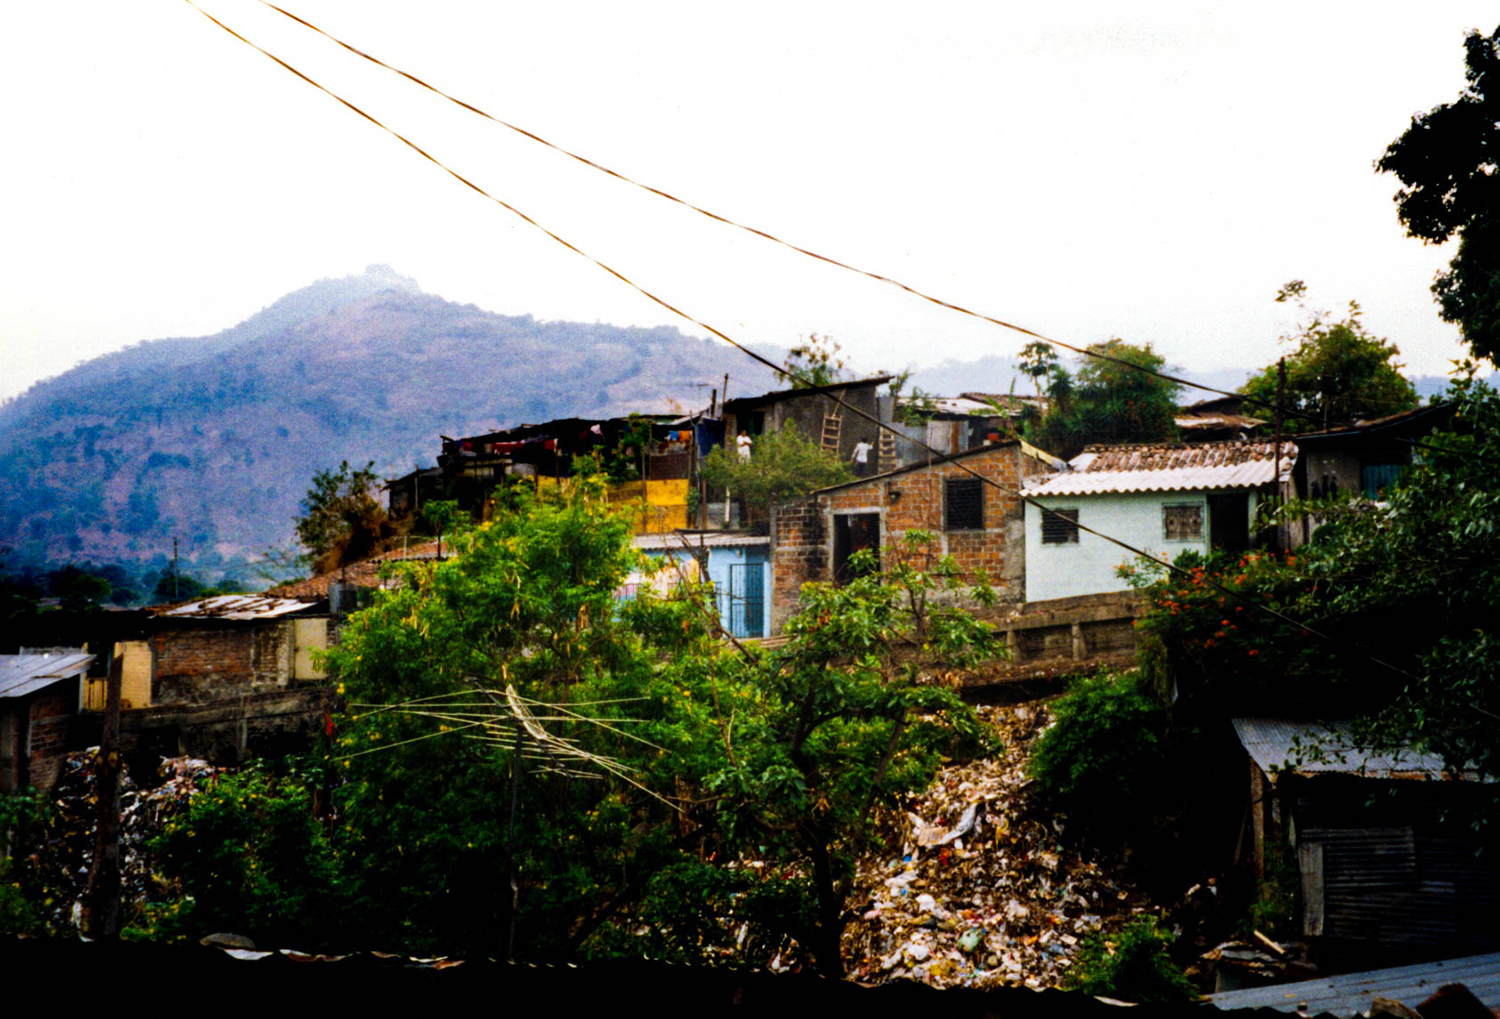 <p>A cluster of makeshift homes on the outskirts of San Salvador. Such homes represent years of effort by their inhabitants, but often these neighbourhoods lack essential services like plumbing, refuse collection, and official recognition of the residents' title to their land. These districts are peripheries not only in the geographical sense, but also in terms of political and economic attention.</p>